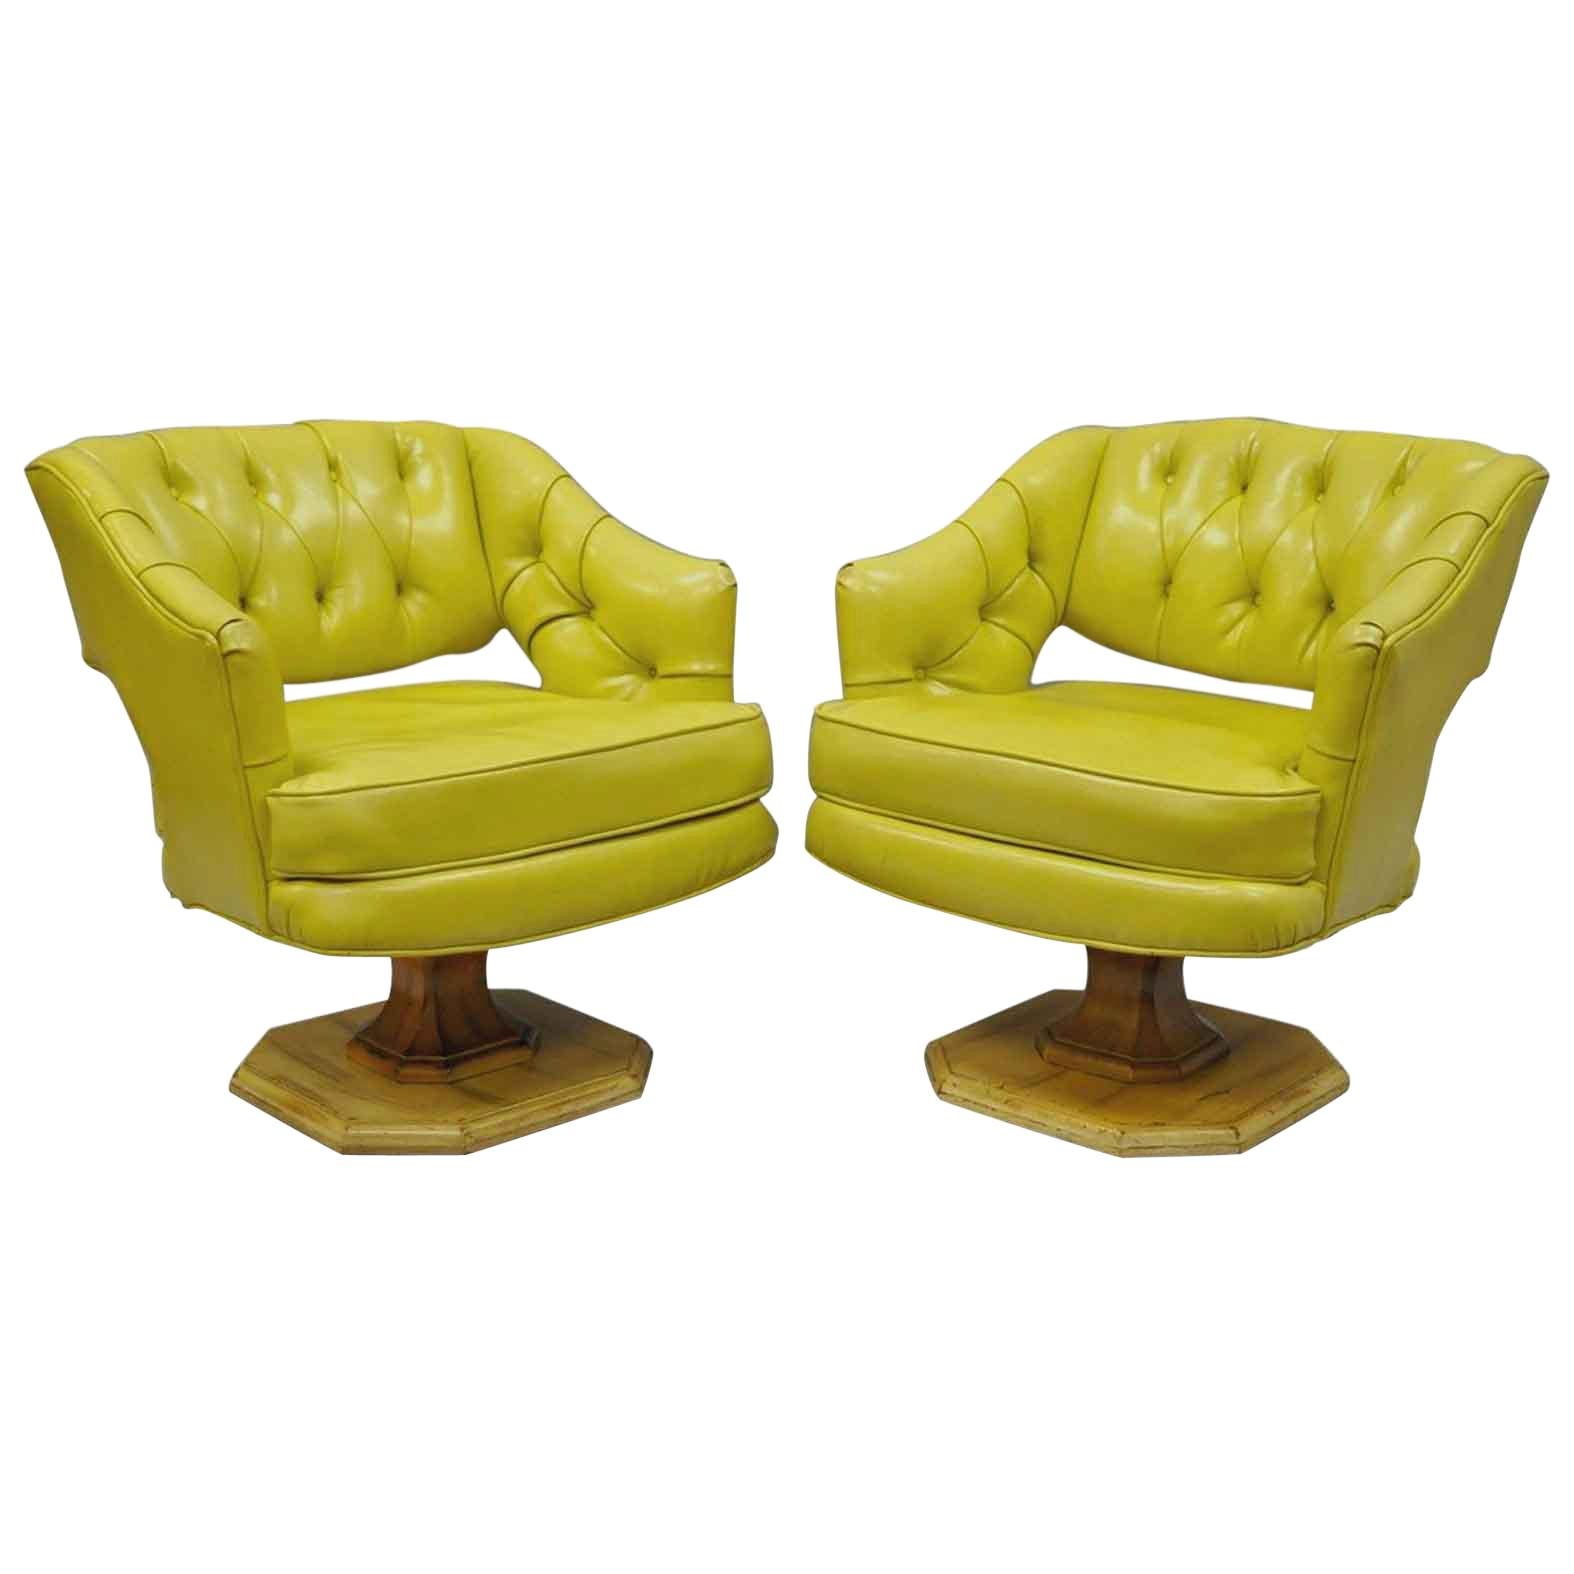 Pair of Silver Craft Green Yellow Swivel Club Lounge Chairs Mid-Century Modern A